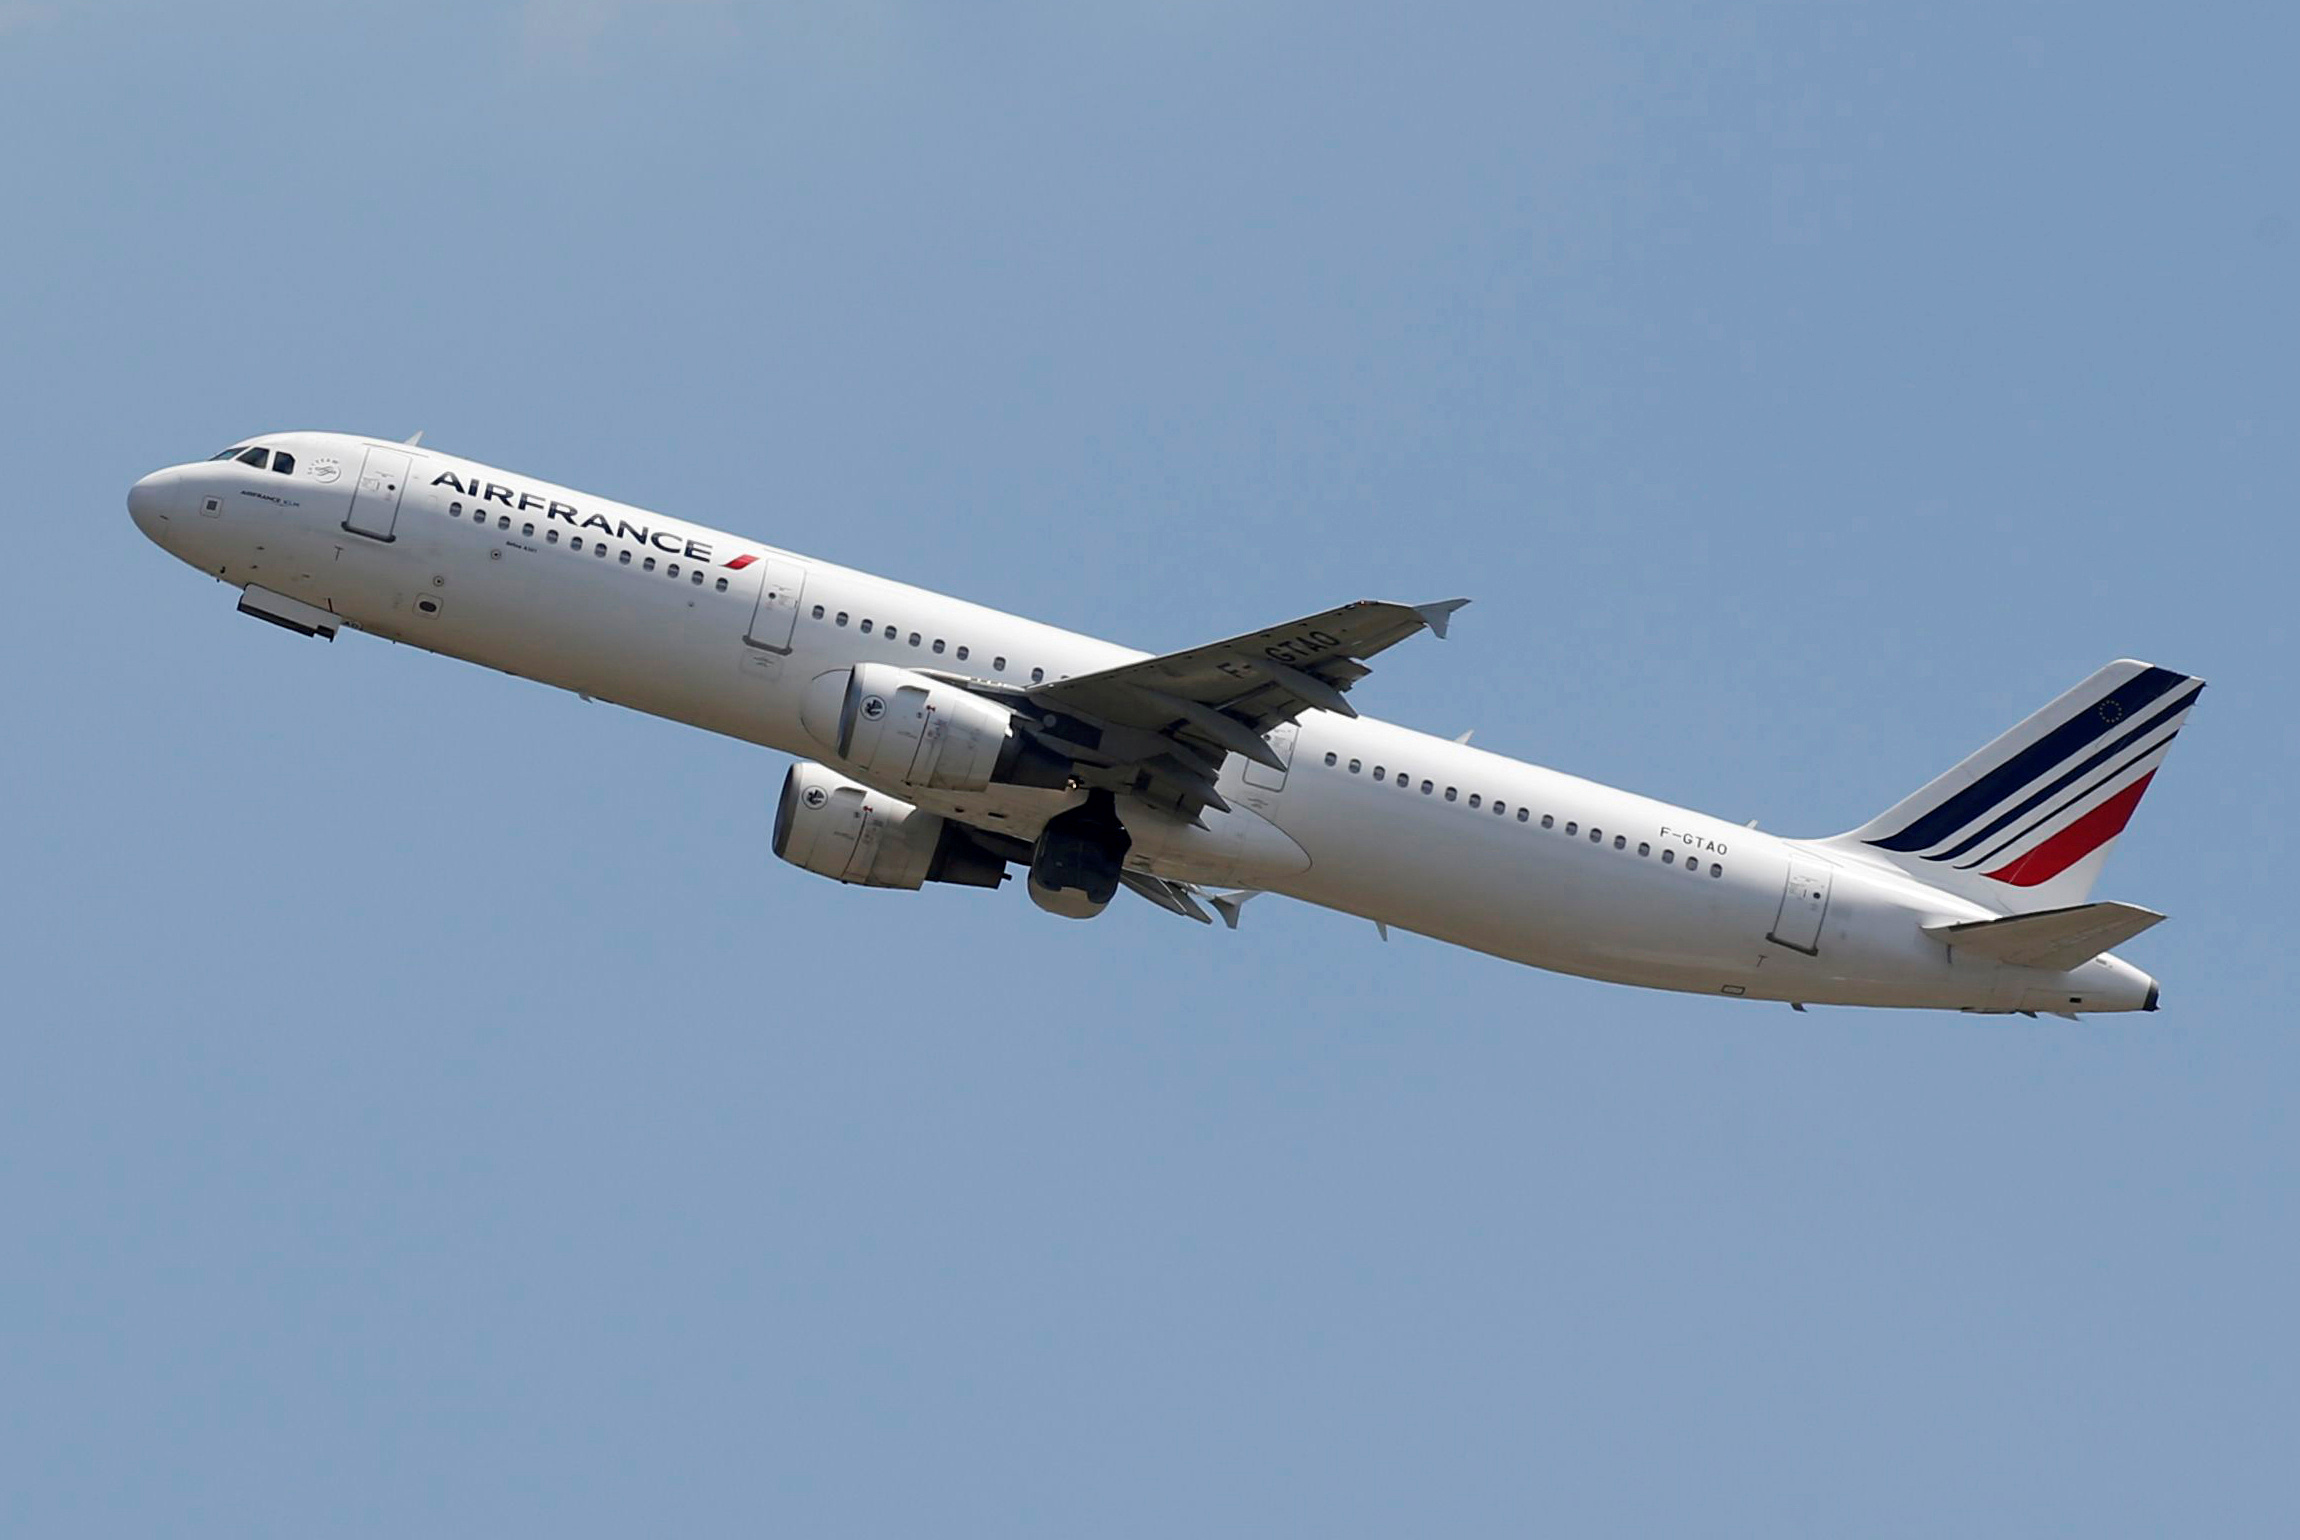 FILE PHOTO: An Air France Airbus A321 aircraft takes off in Colomiers near Toulouse